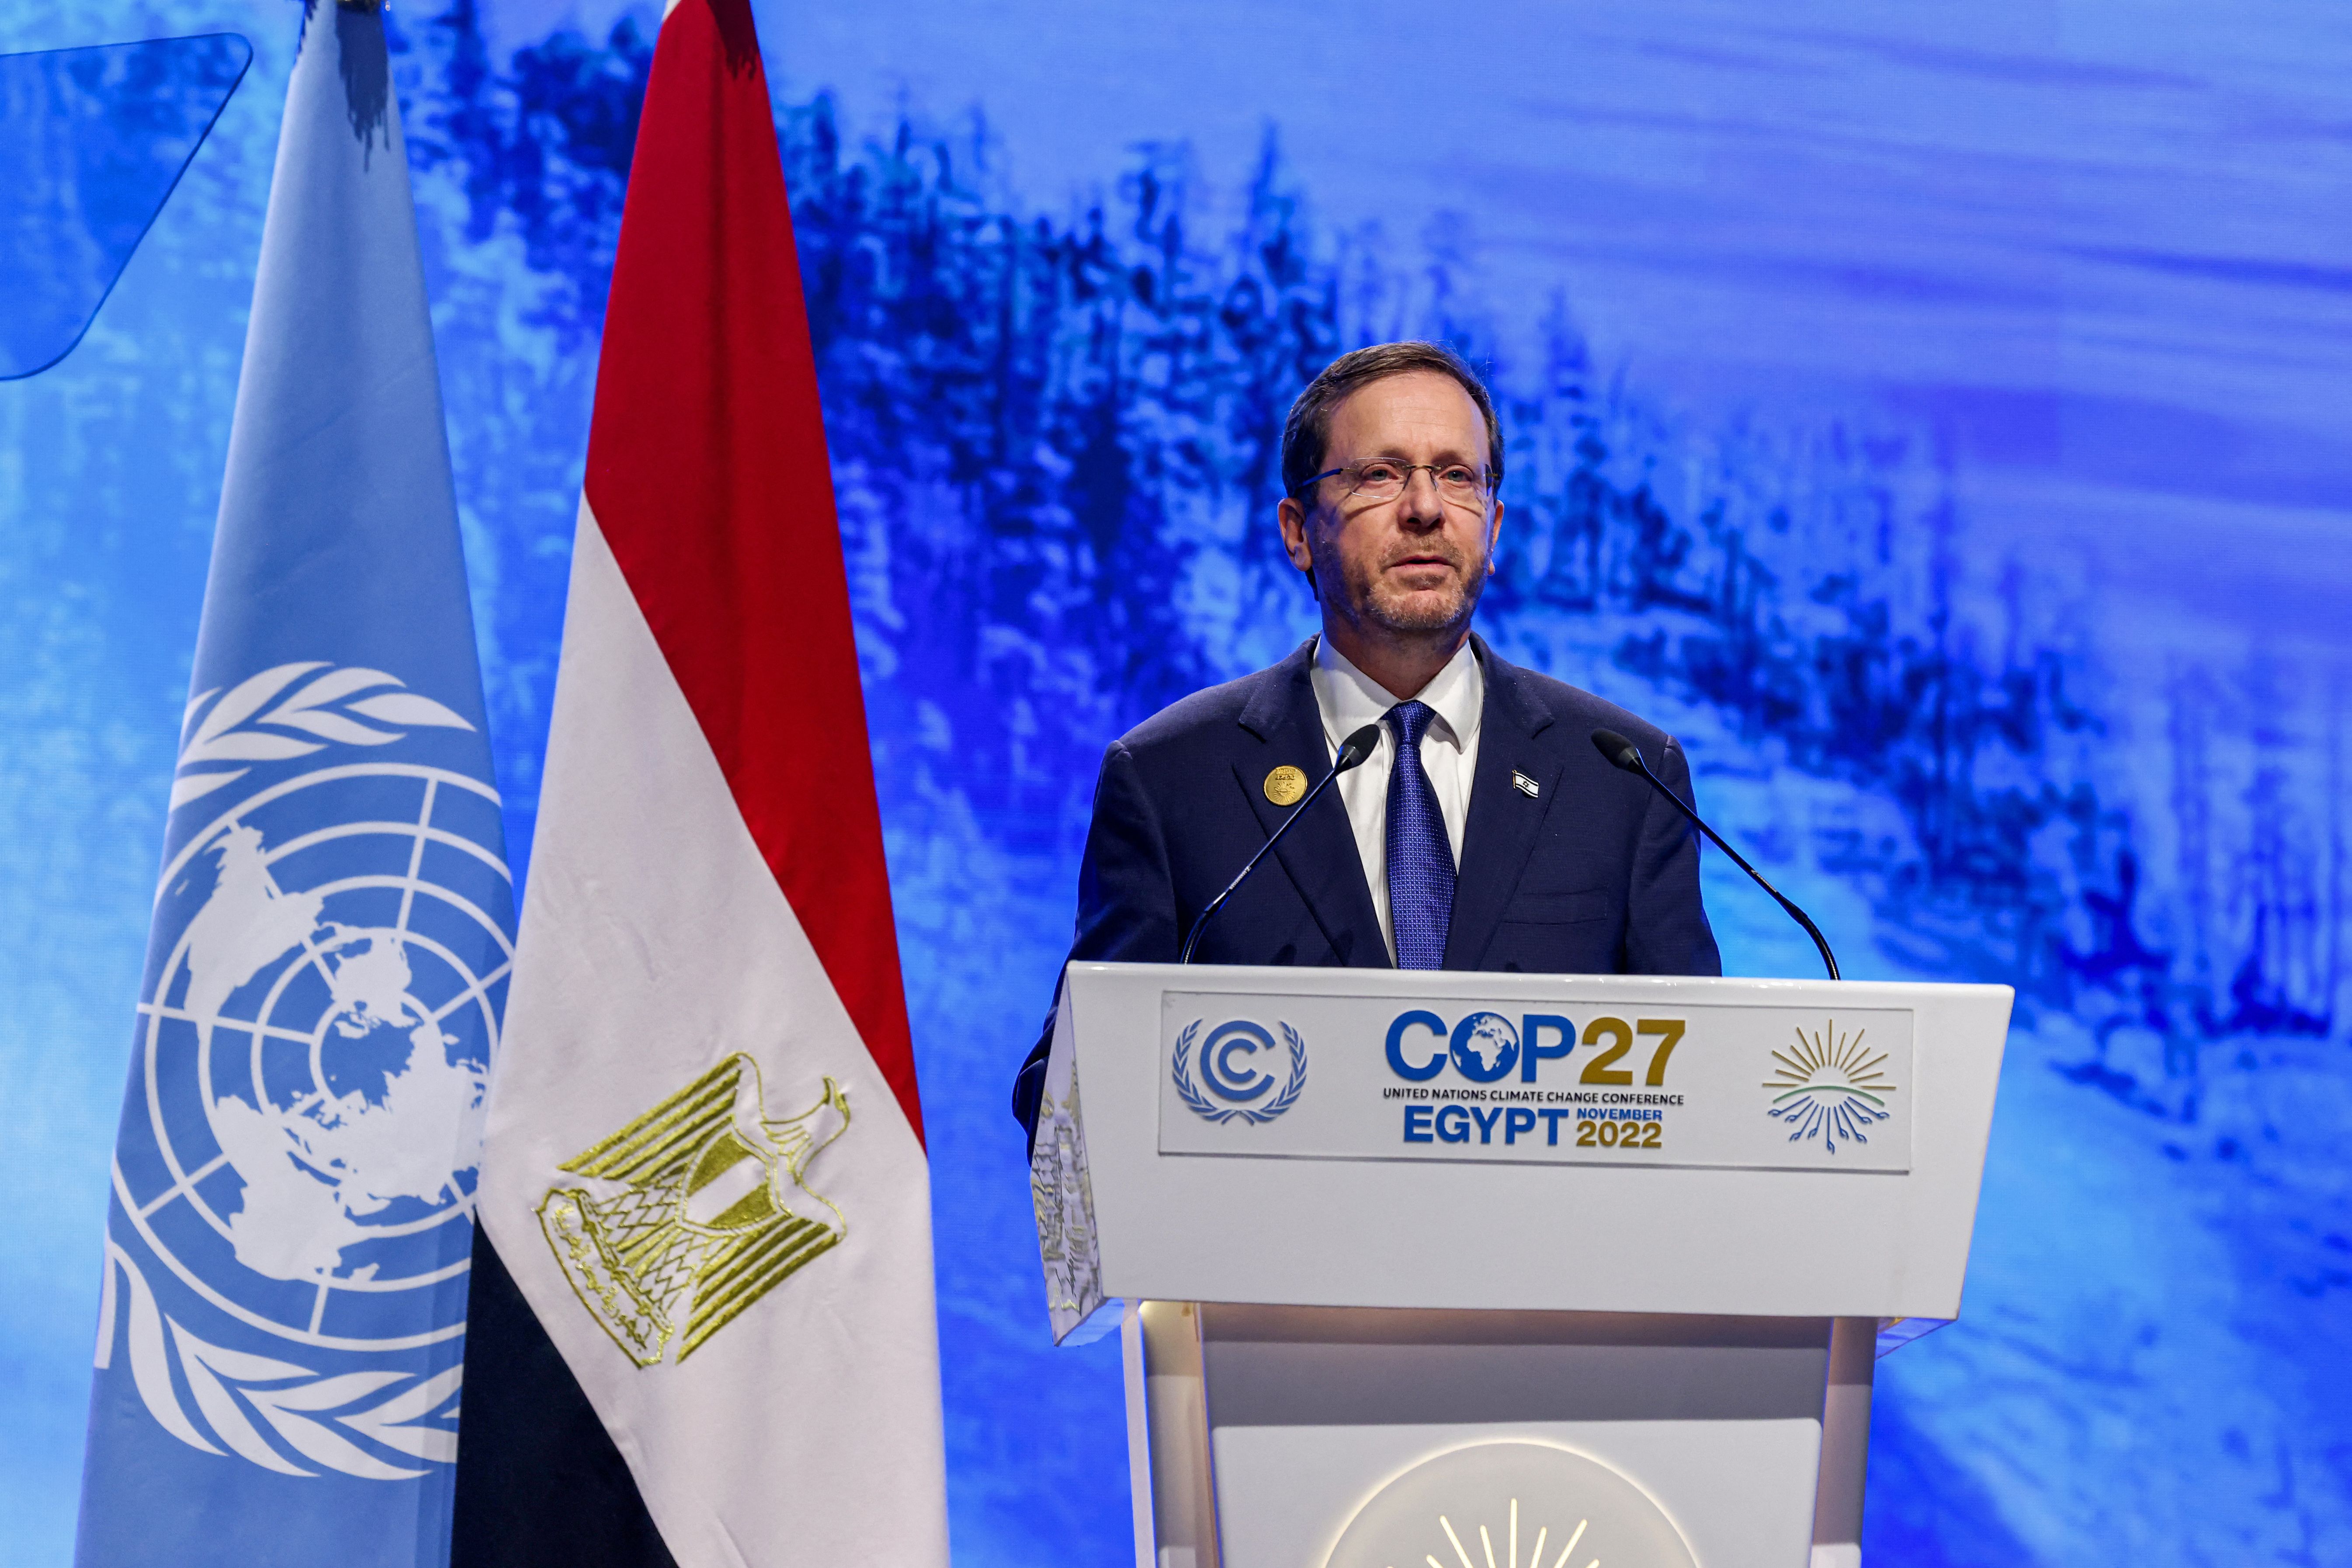 Israeli President Isaac Herzog delivers a speech at the COP27 climate conference in Sharm el-Sheikh, Egypt on Nov. 7, 2022. Photo by AHMAD GHARABLI/AFP via Getty Images.